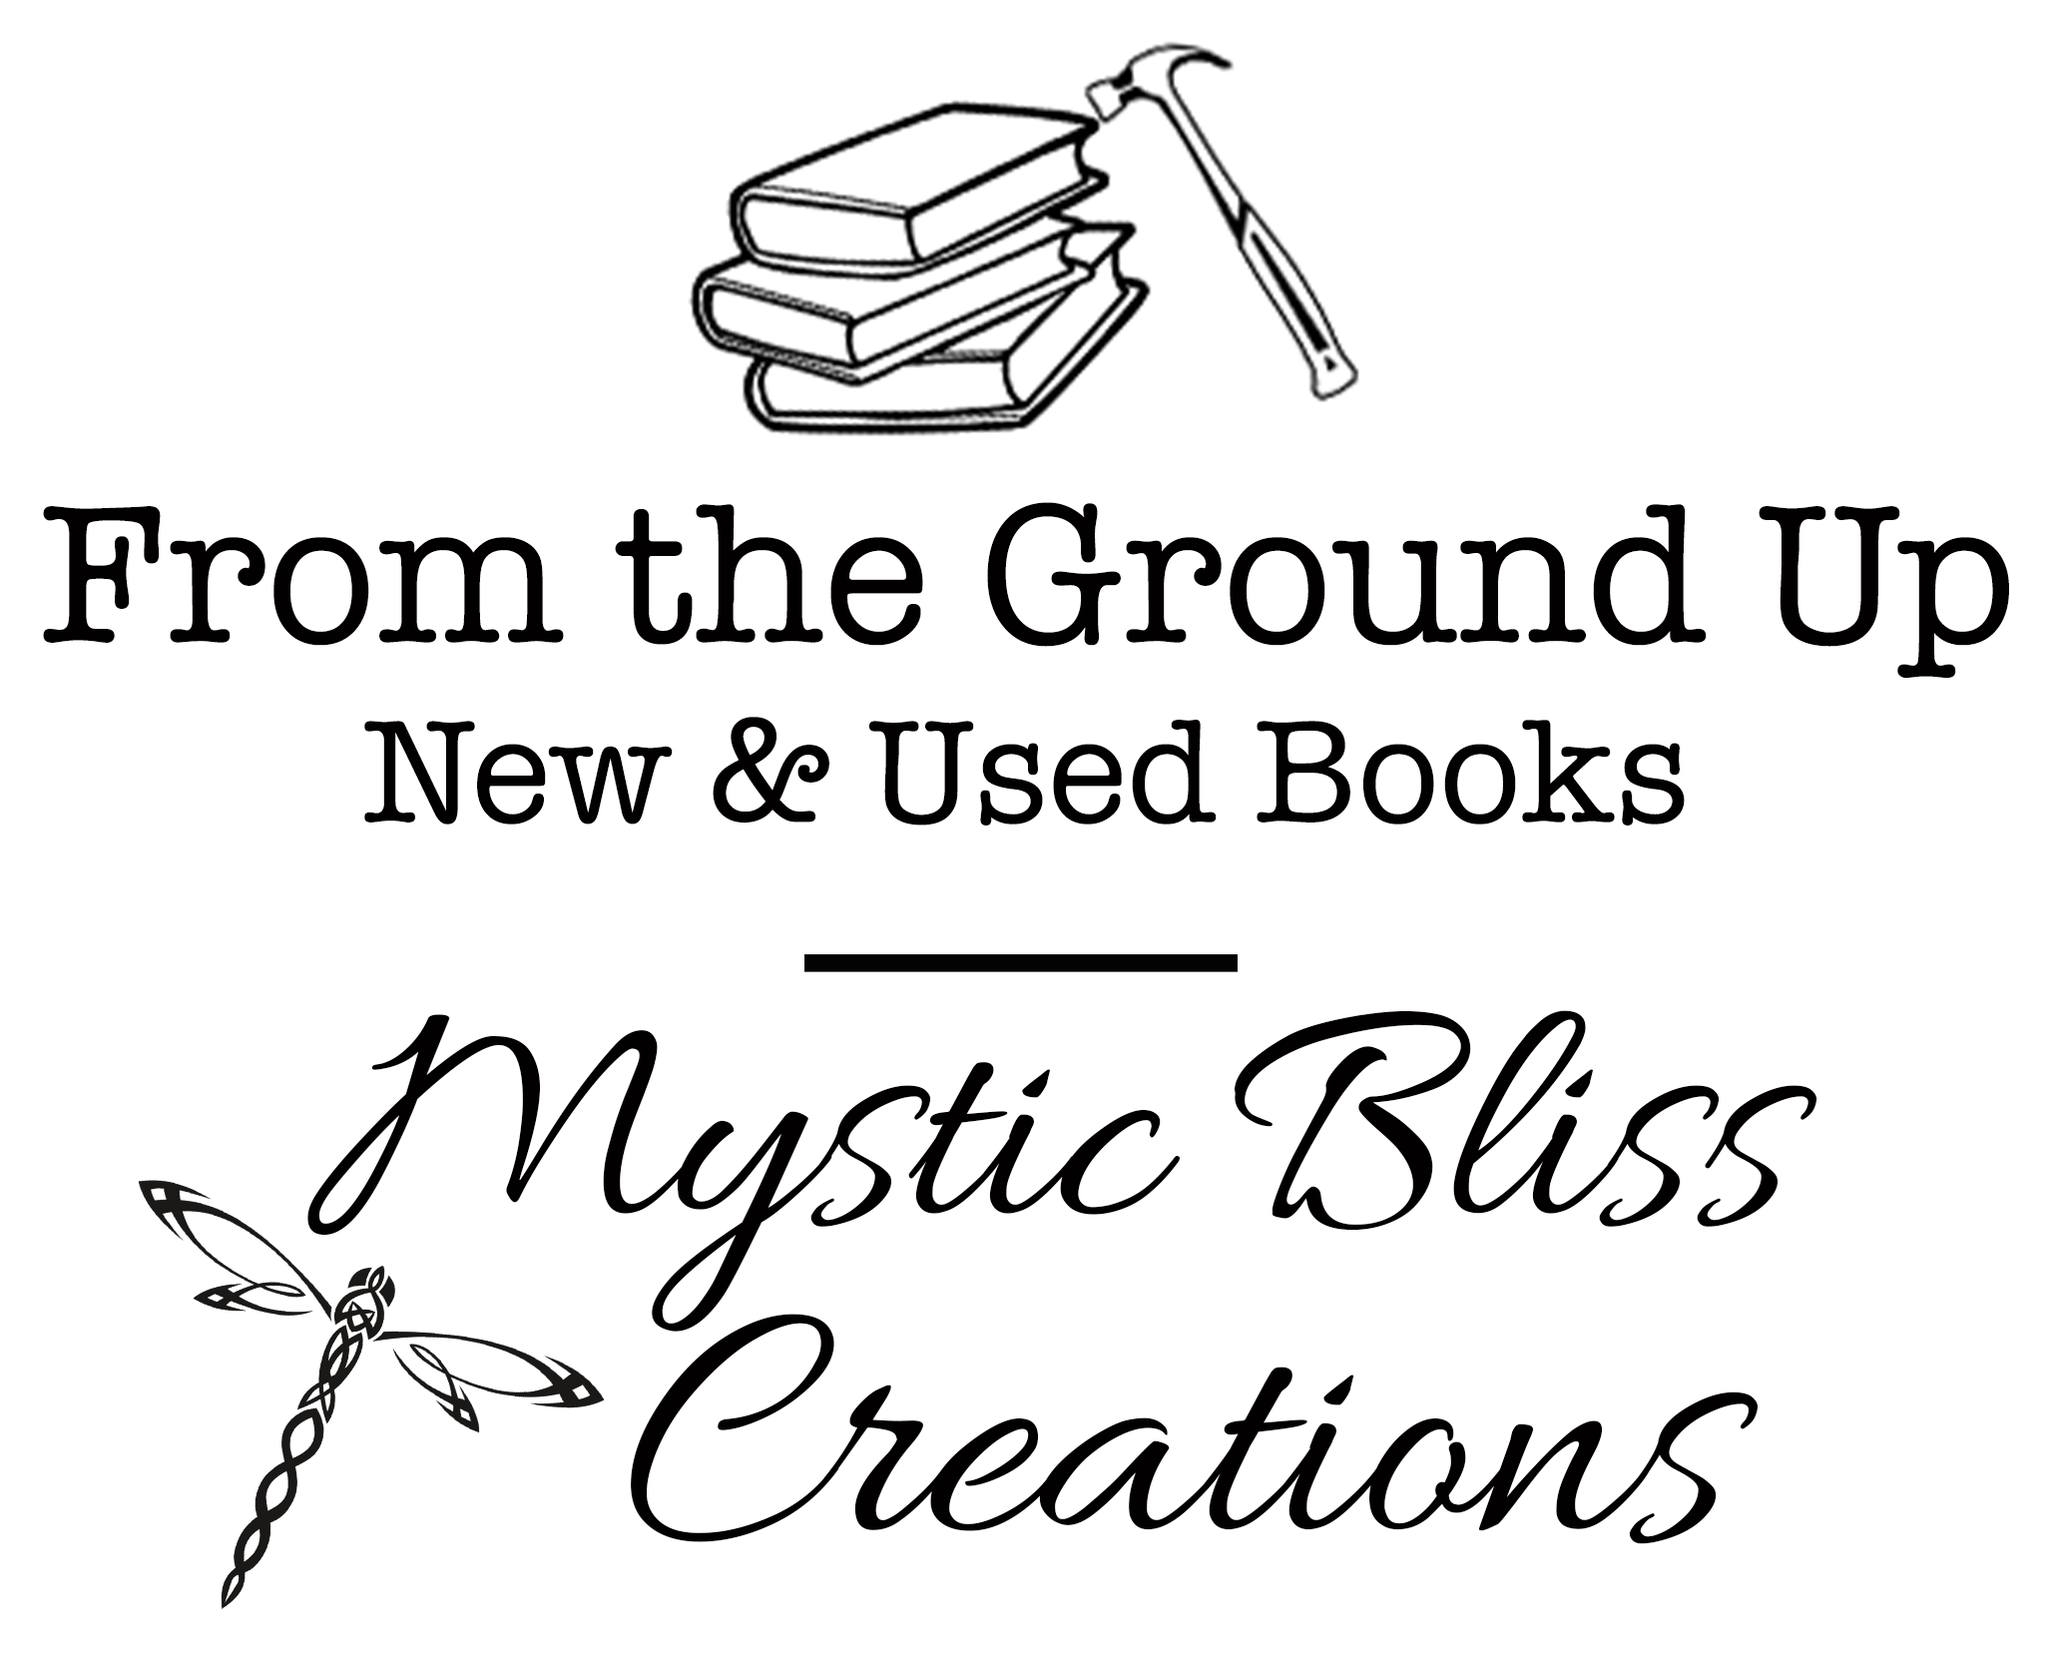 From the Ground Up Books and Mystic Bliss Creations Expand to Shepherdsville, KY